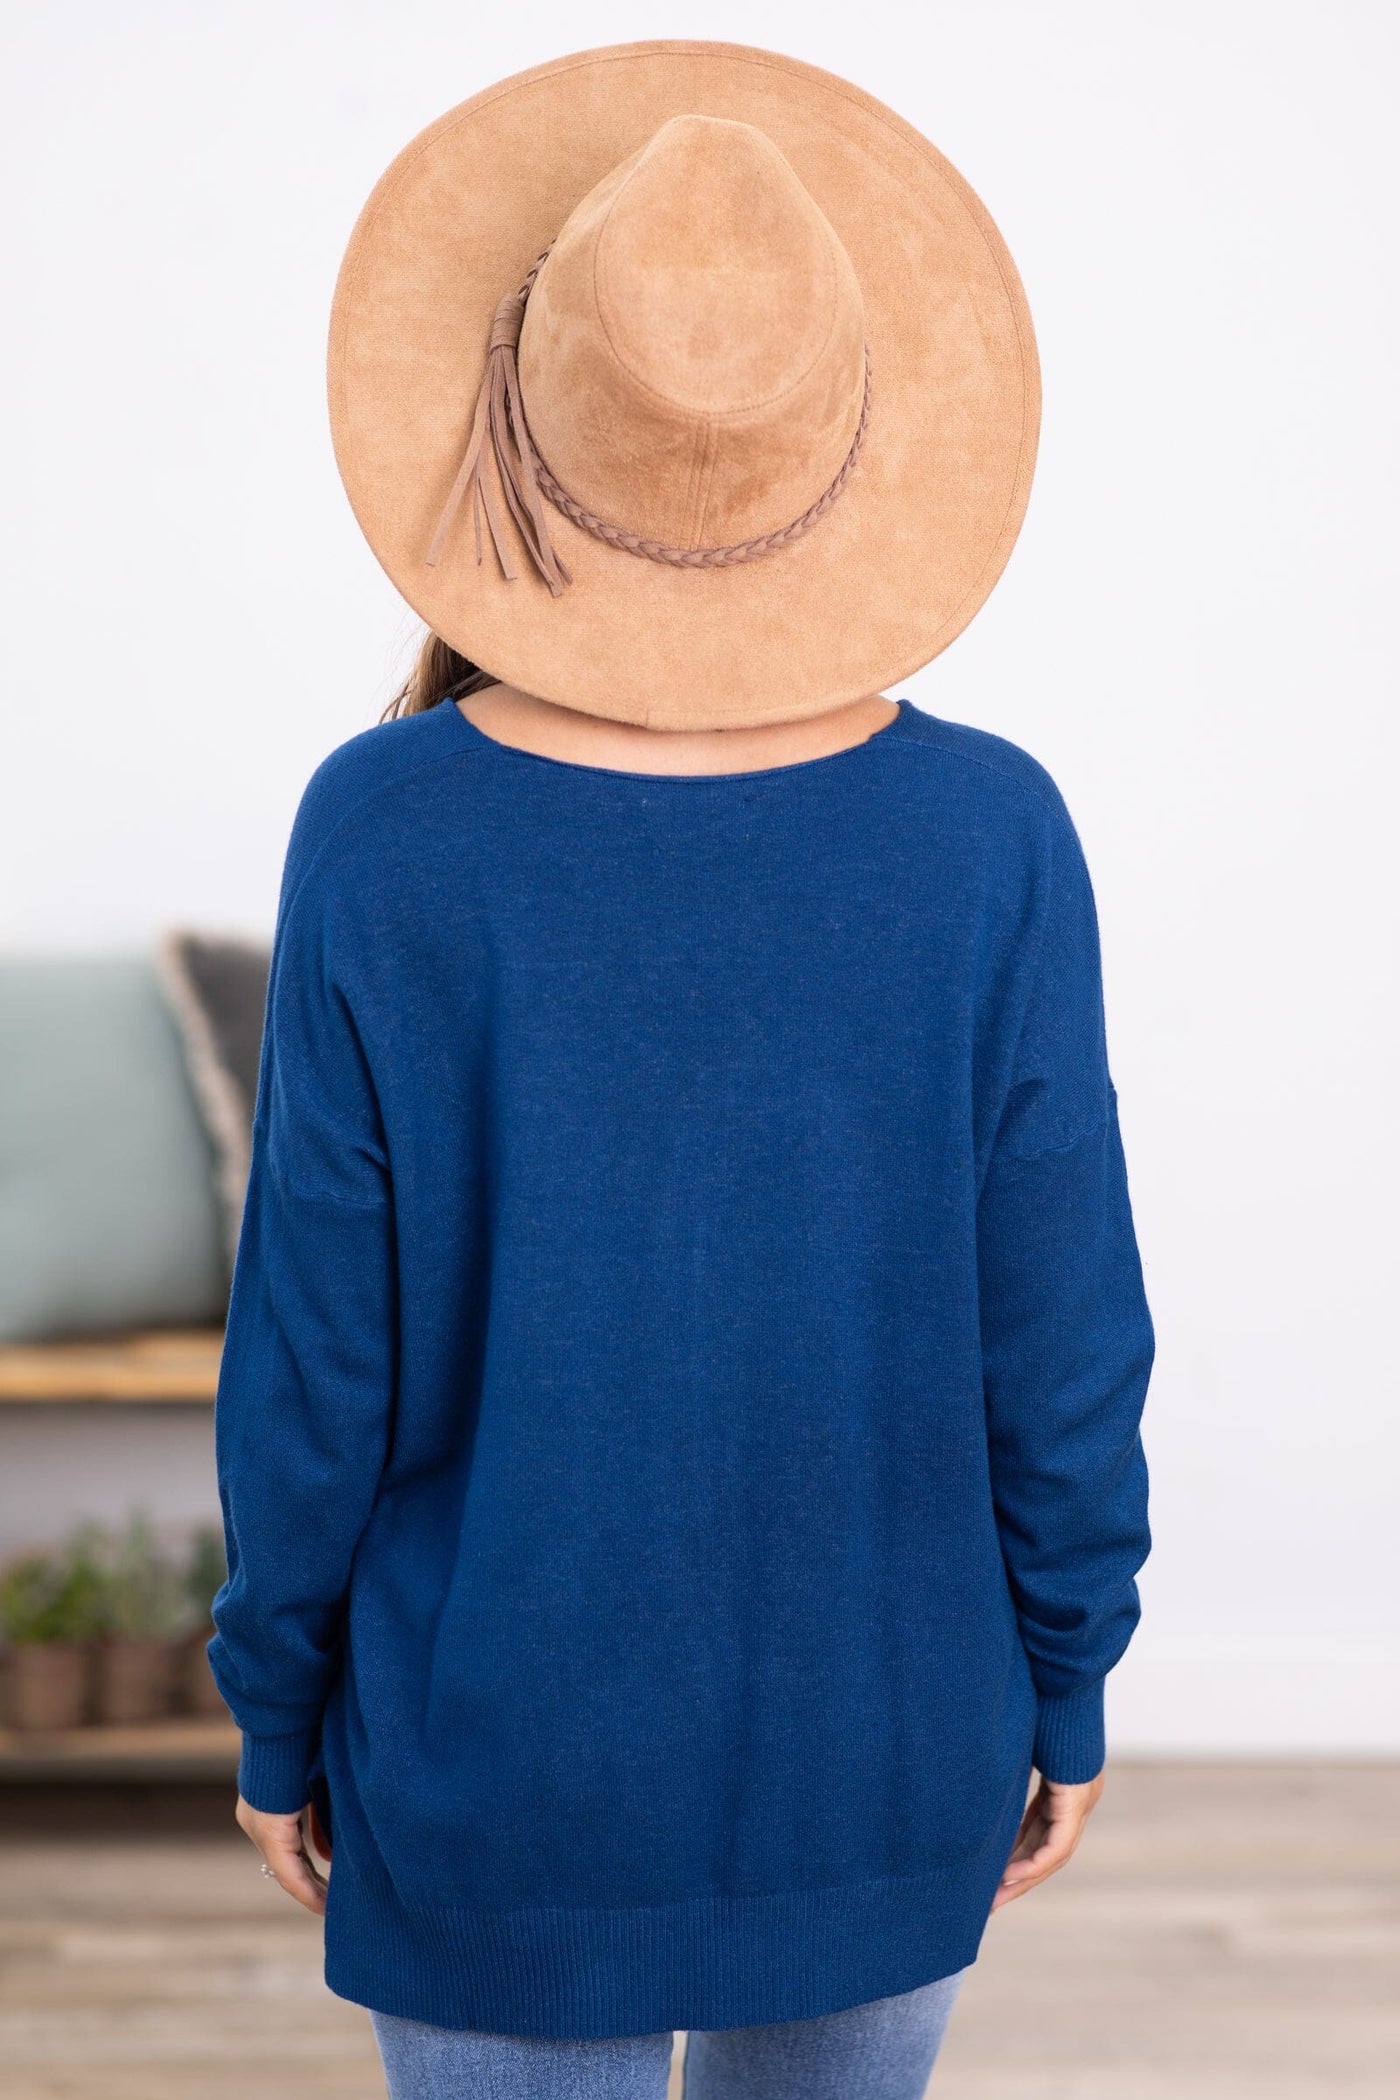 Navy Front Seam Garment Dyed Sweater - Filly Flair